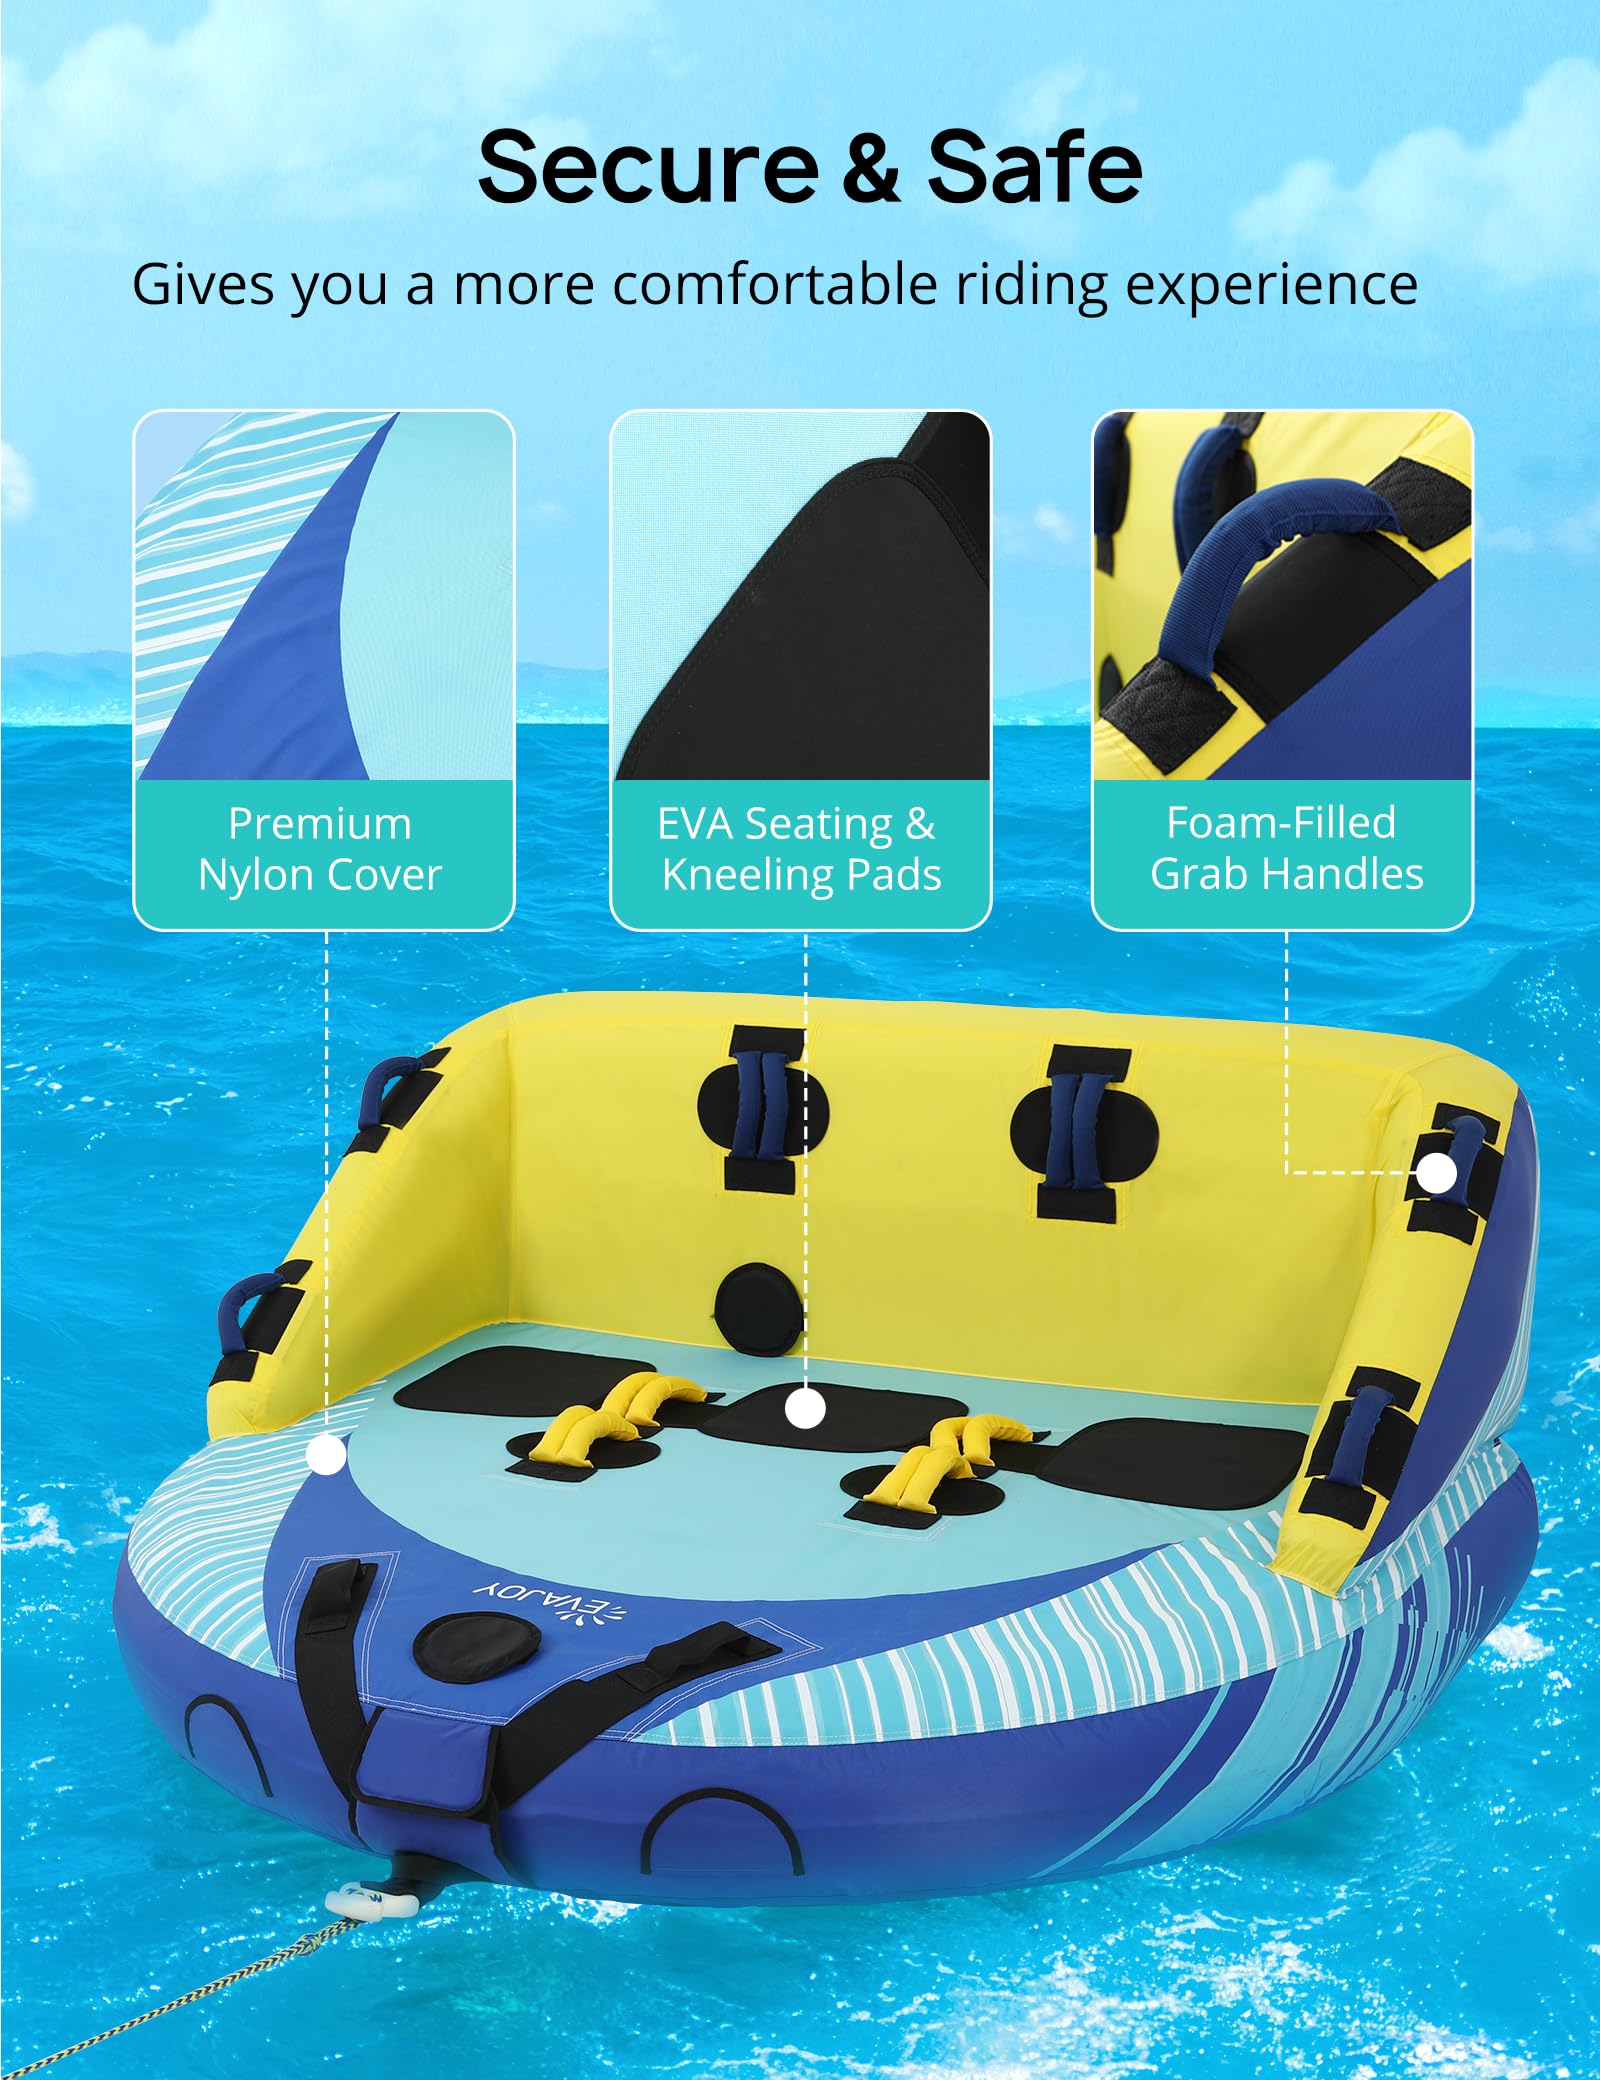 EVAJOY 3 Person Towable Tube for Boating, Inflatable Towable Tubes for Boats 1-3 Rider, Water Sports Tube with Dual Front and Back Tow Points, Inflatable Boat with Nylon Tow Rope and Air Pump